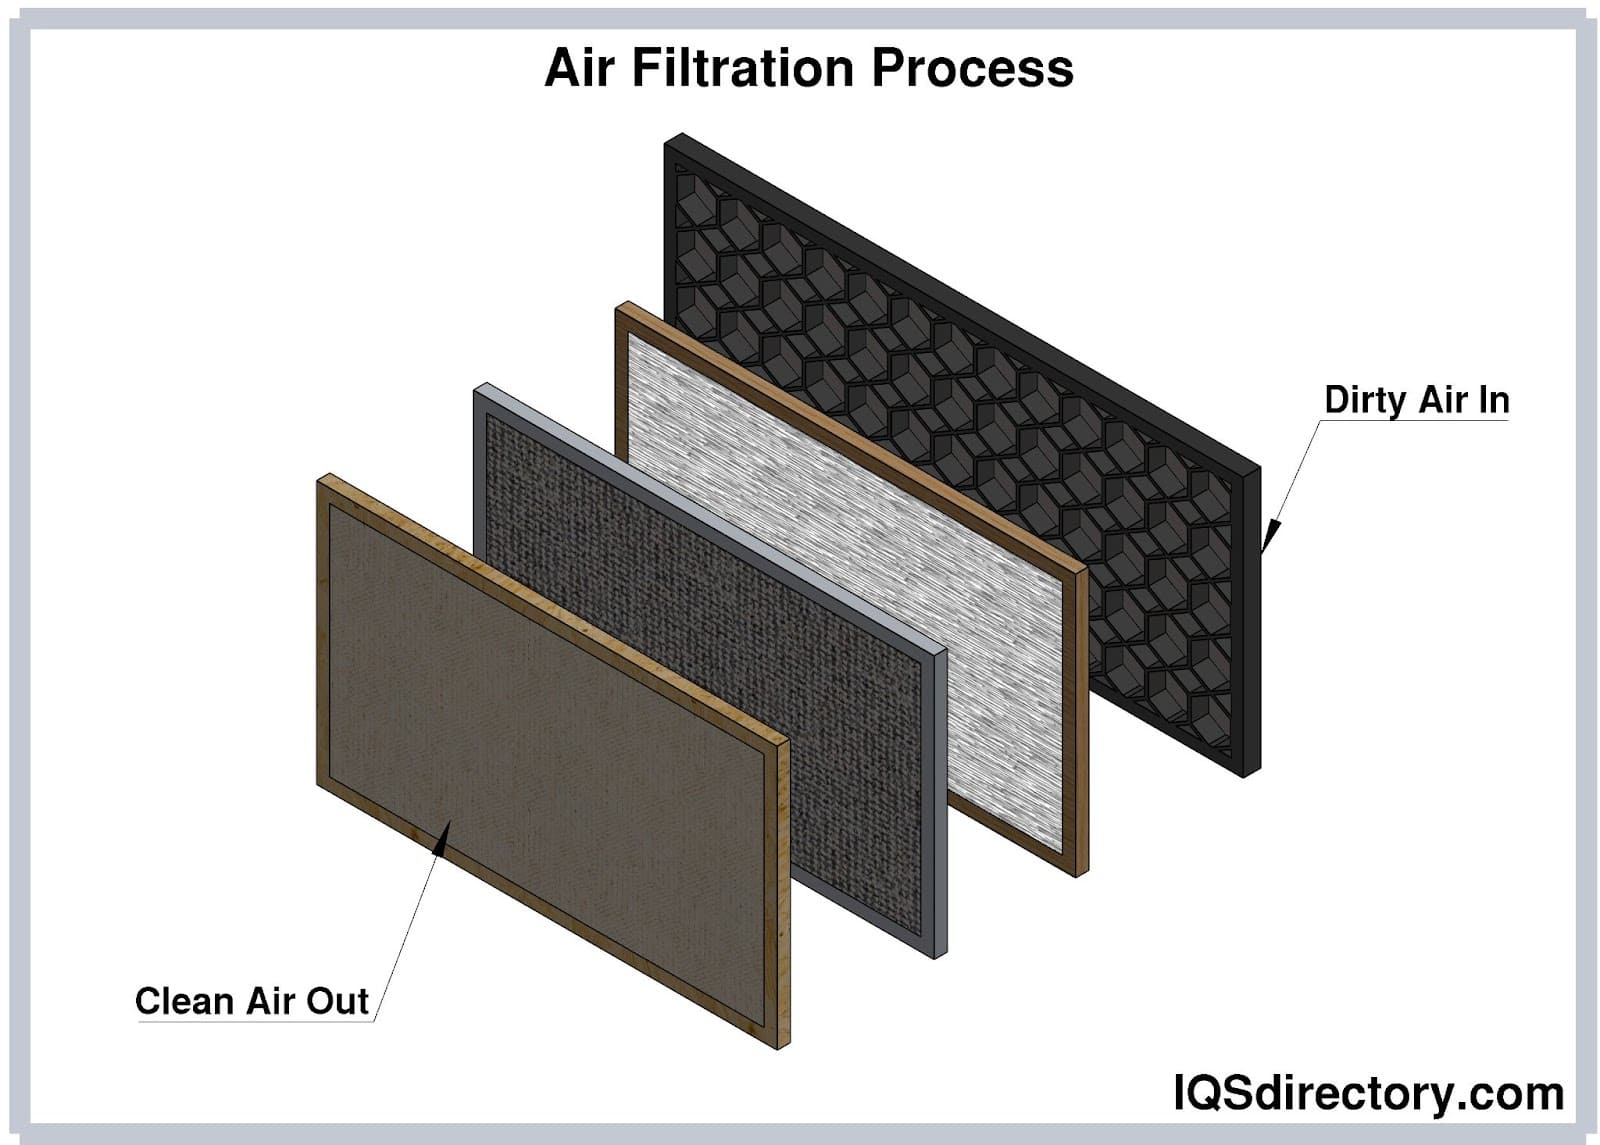 Air Filters: What Is It? How Does It Work? Types, Uses